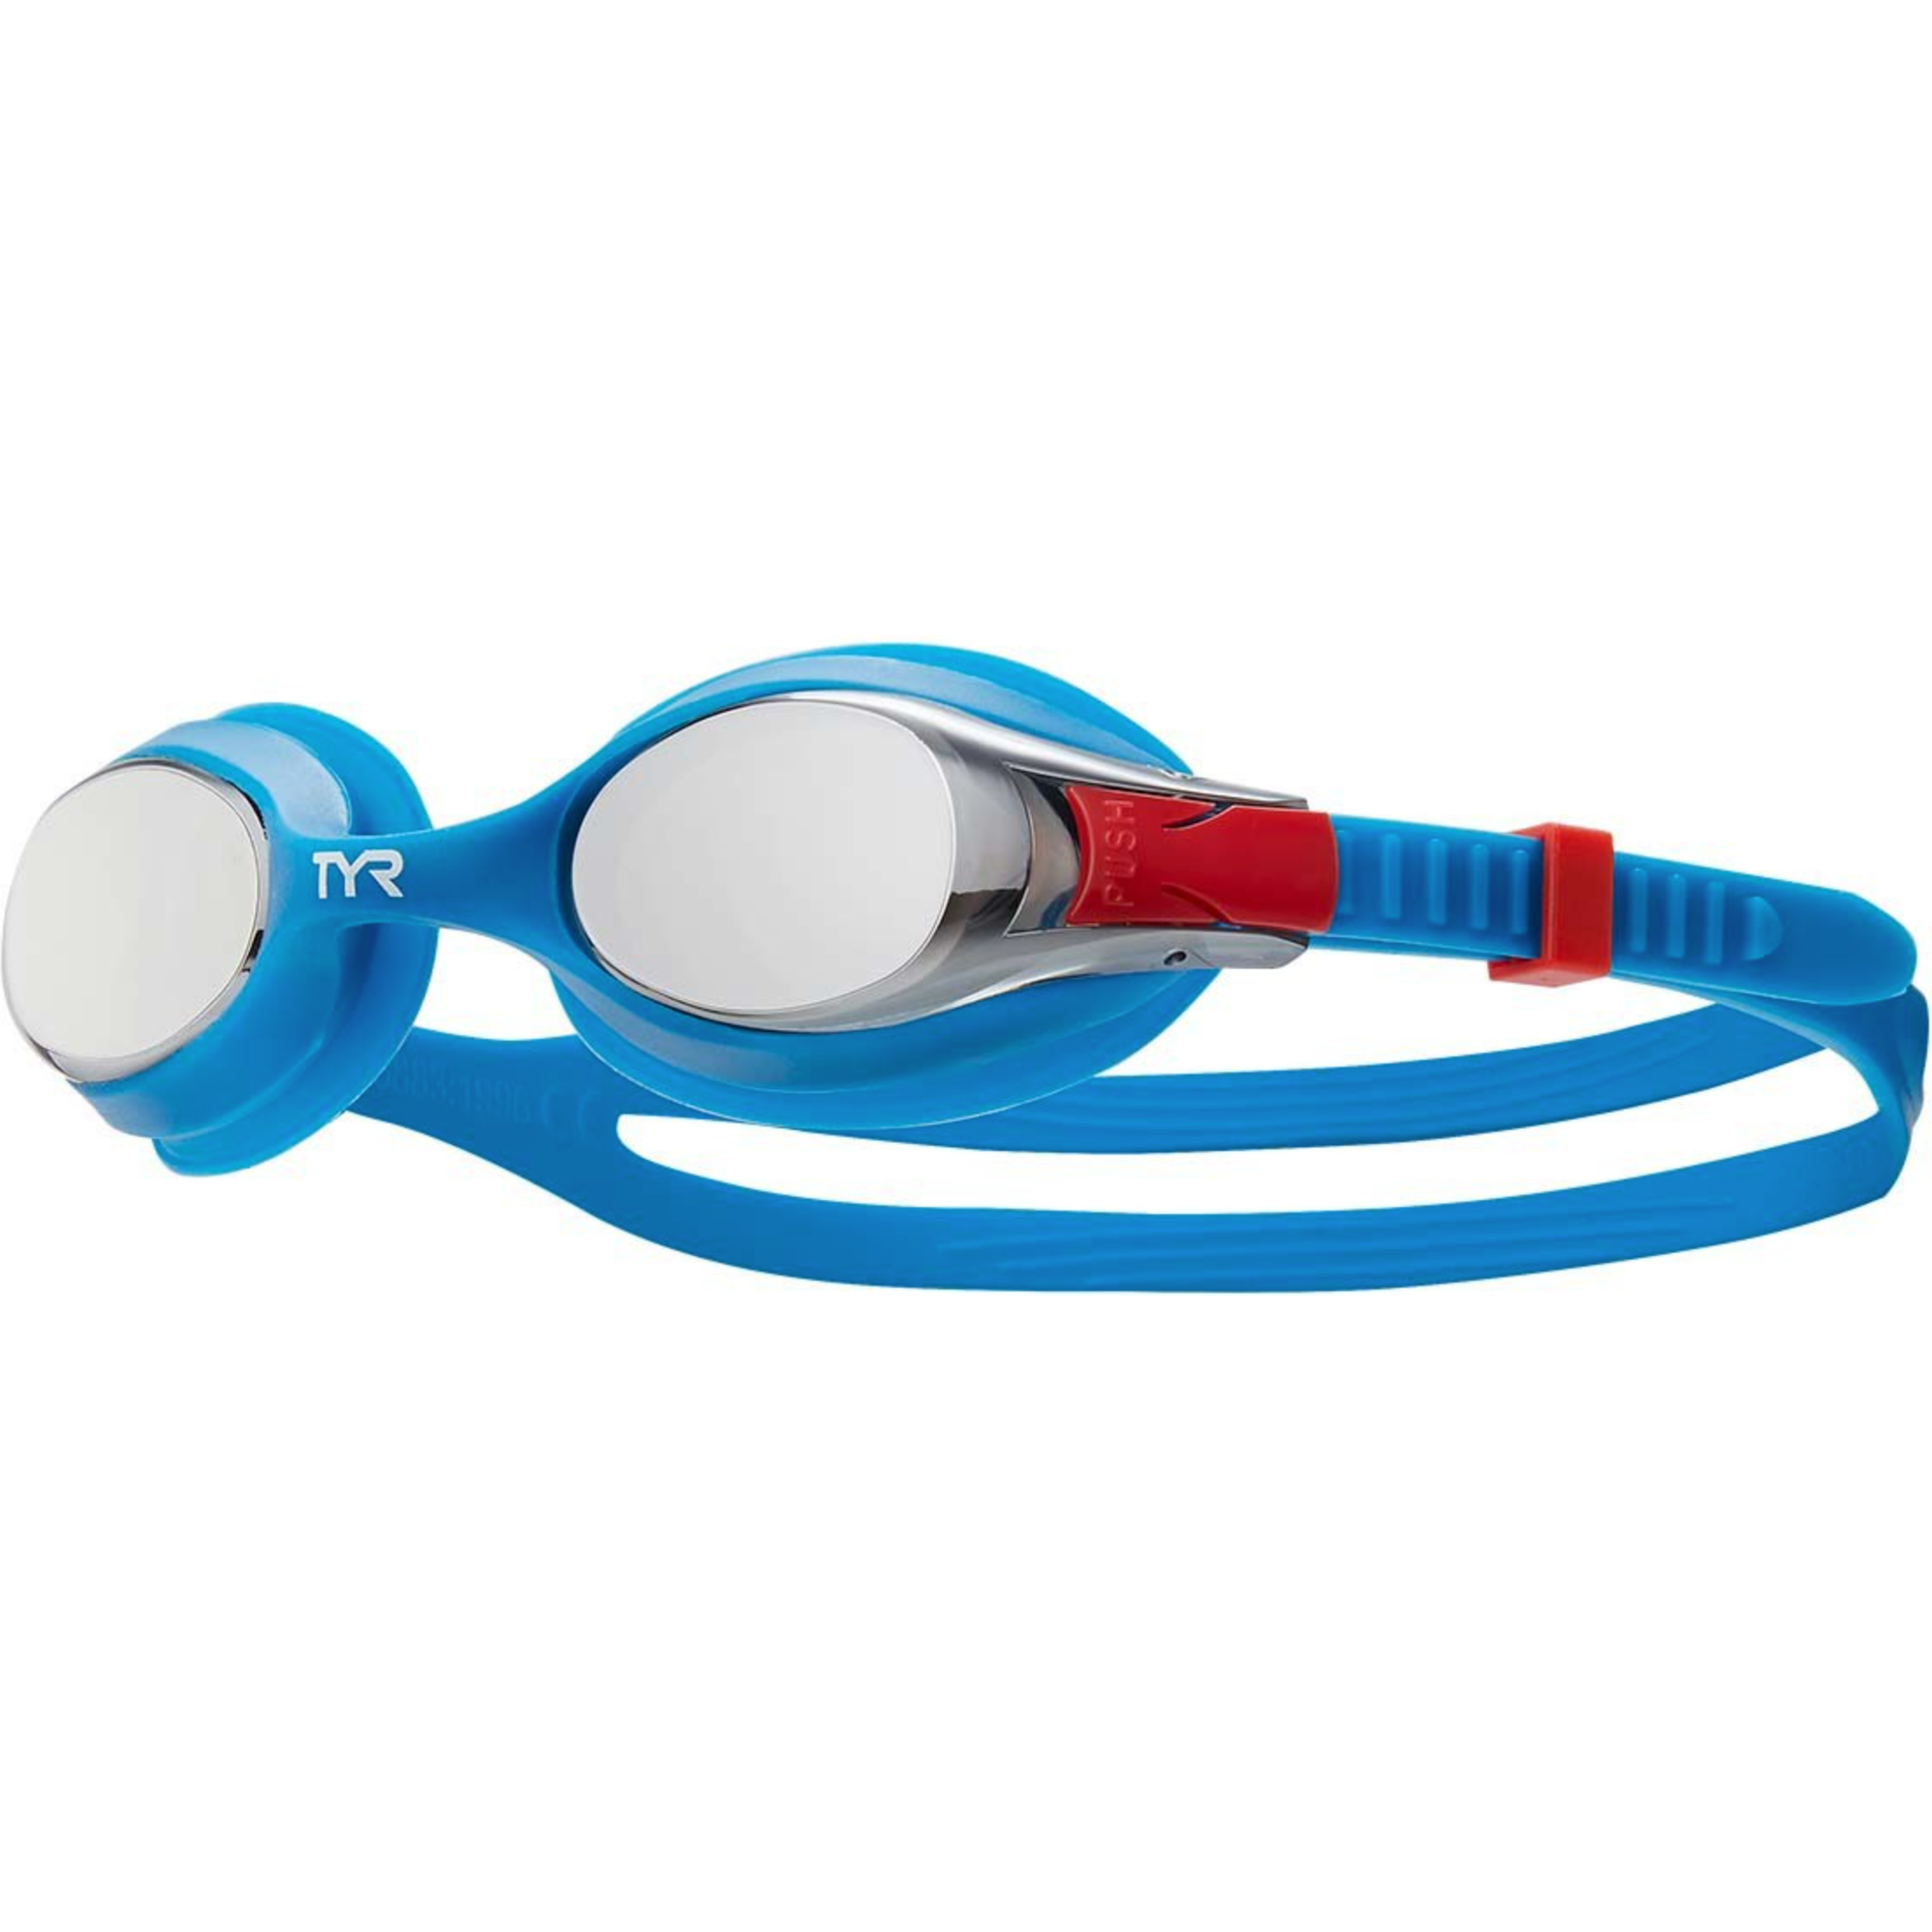 TYR Swimple Mirrored Goggle